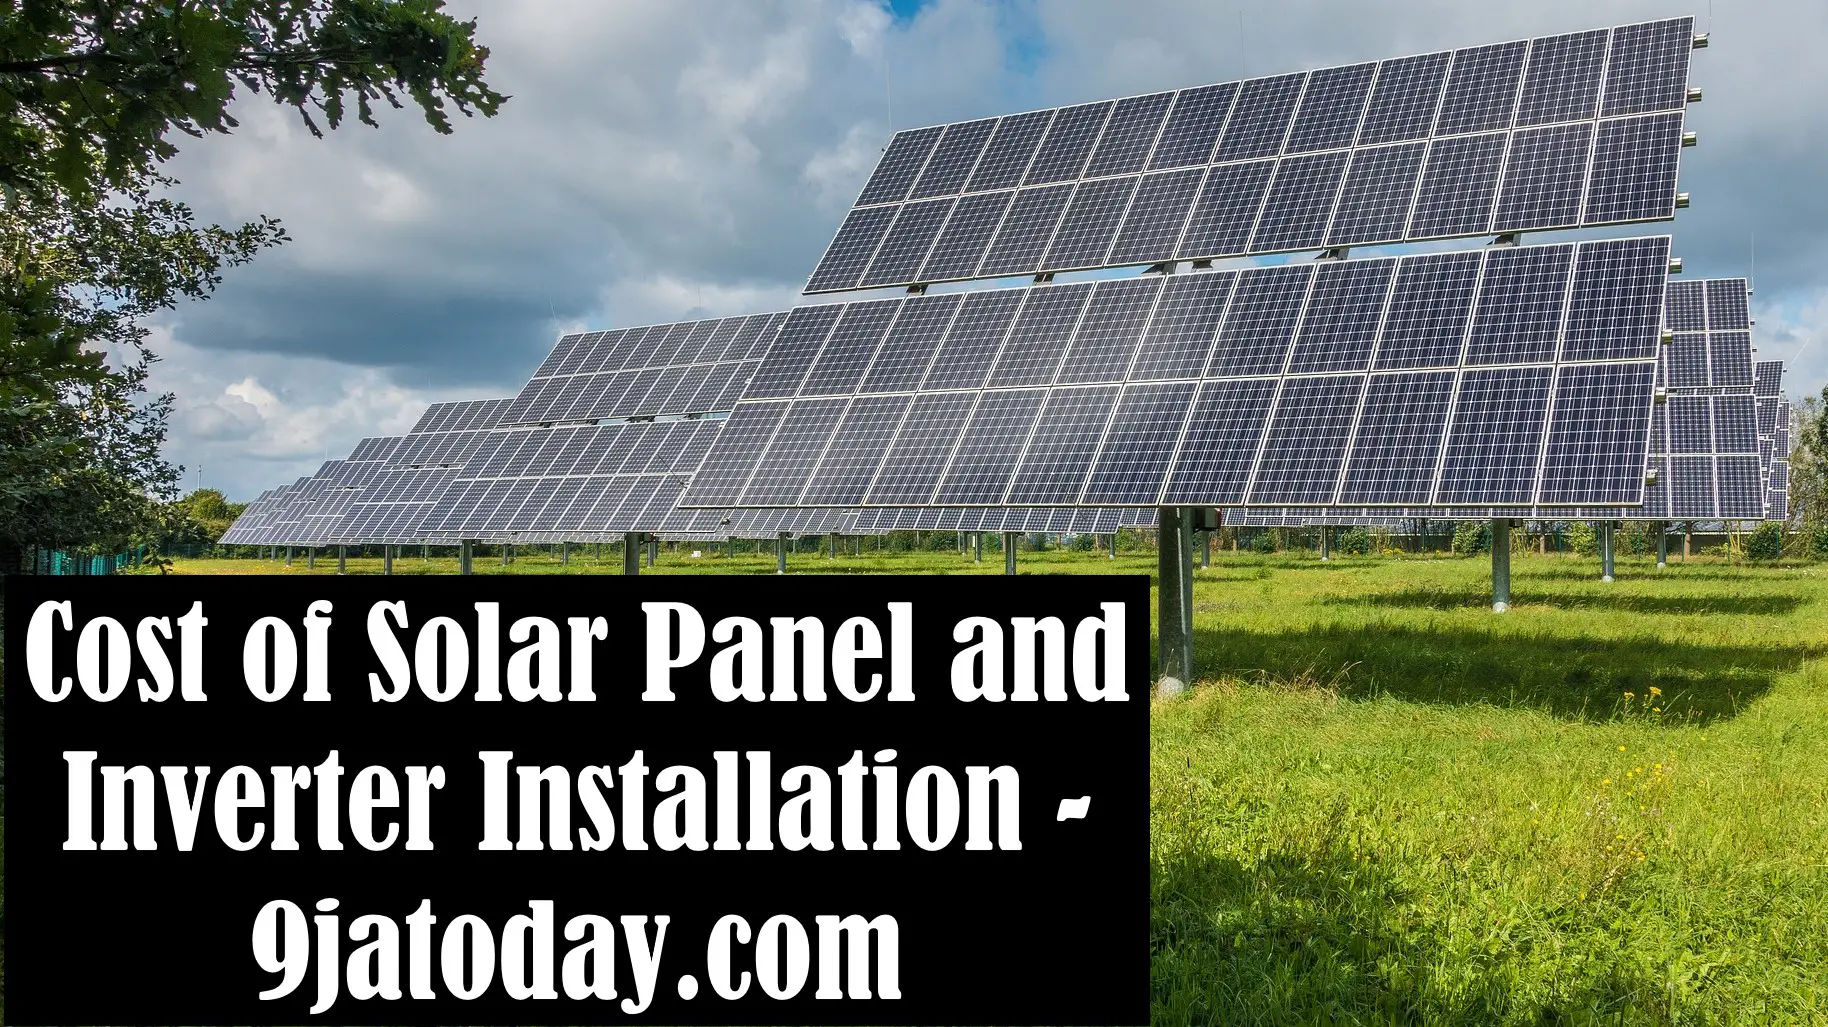 Cost of Solar Panel and Inverter Installation